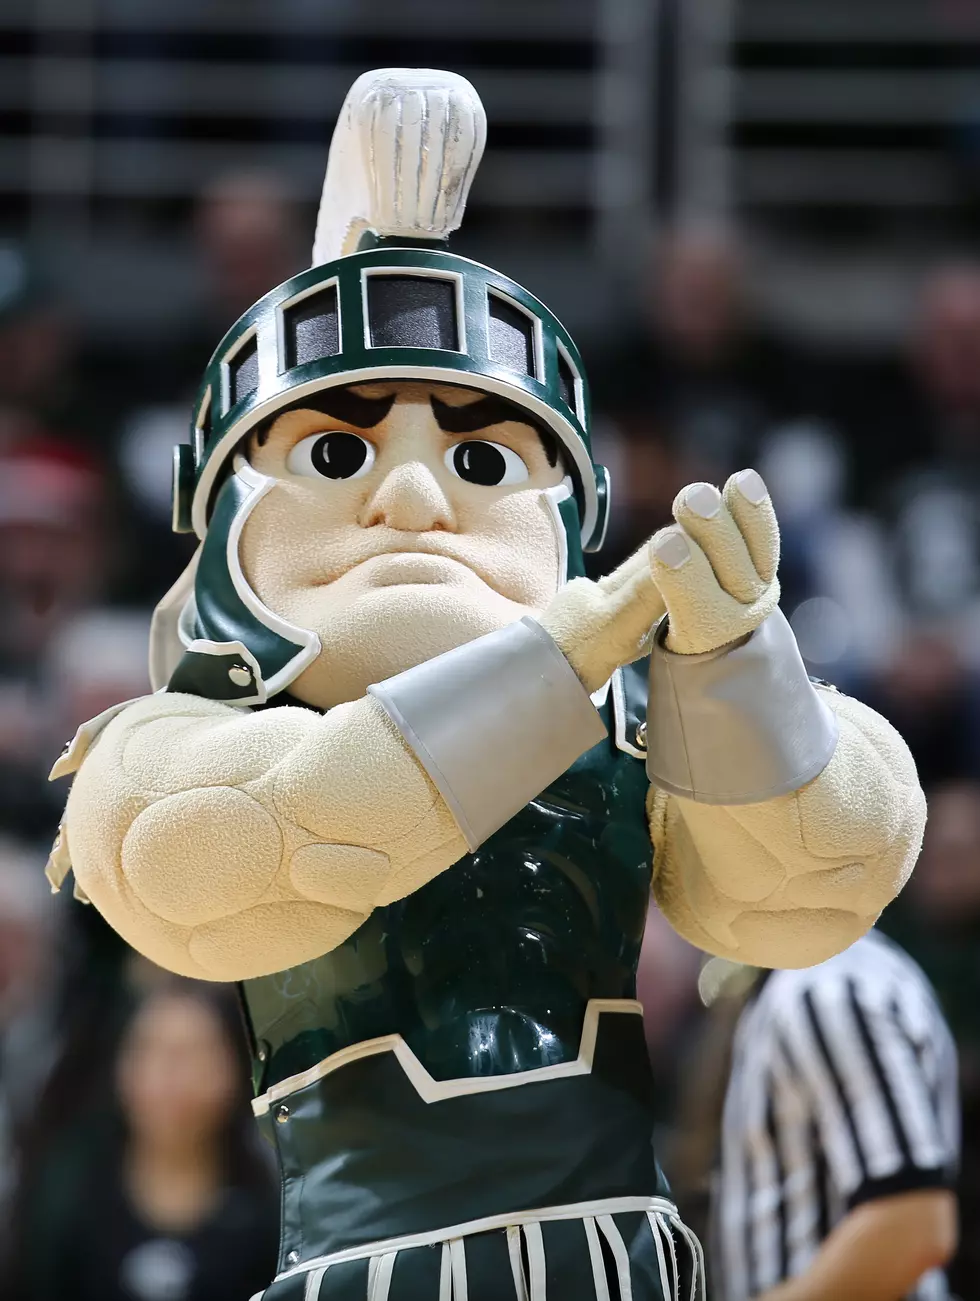 Michigan State Officially Reveals Danton Cole as Hockey Head Coach